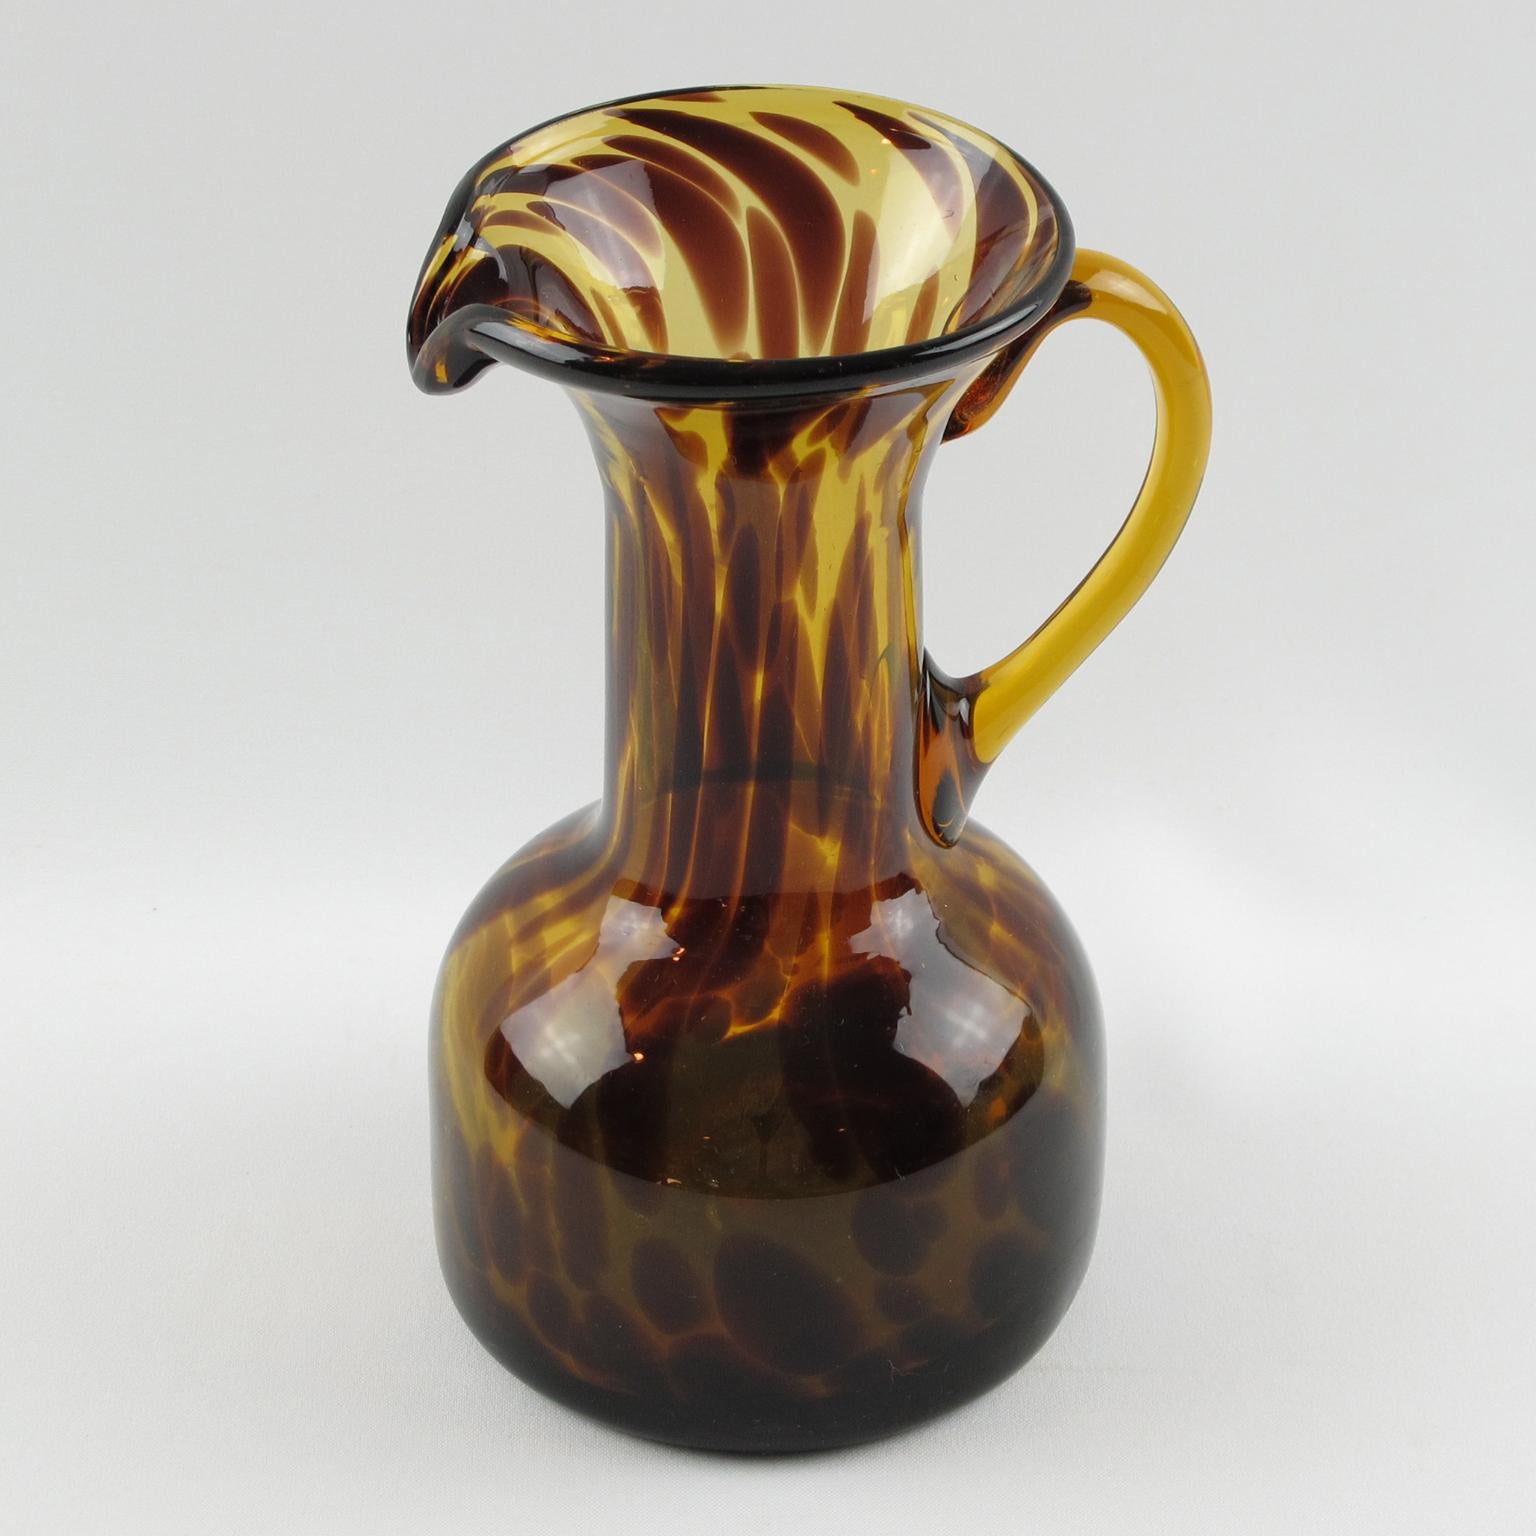 Elegant glass pitcher manufactured by Empoli, Italy for Christian Dior Home Collection. Mouth-blown with an exclusive tortoiseshell (tortoise) color flowing pattern. Polished pontil mark on the bottom.
Measurements: 5.50 in. wide (14 cm) x 4.12 in.